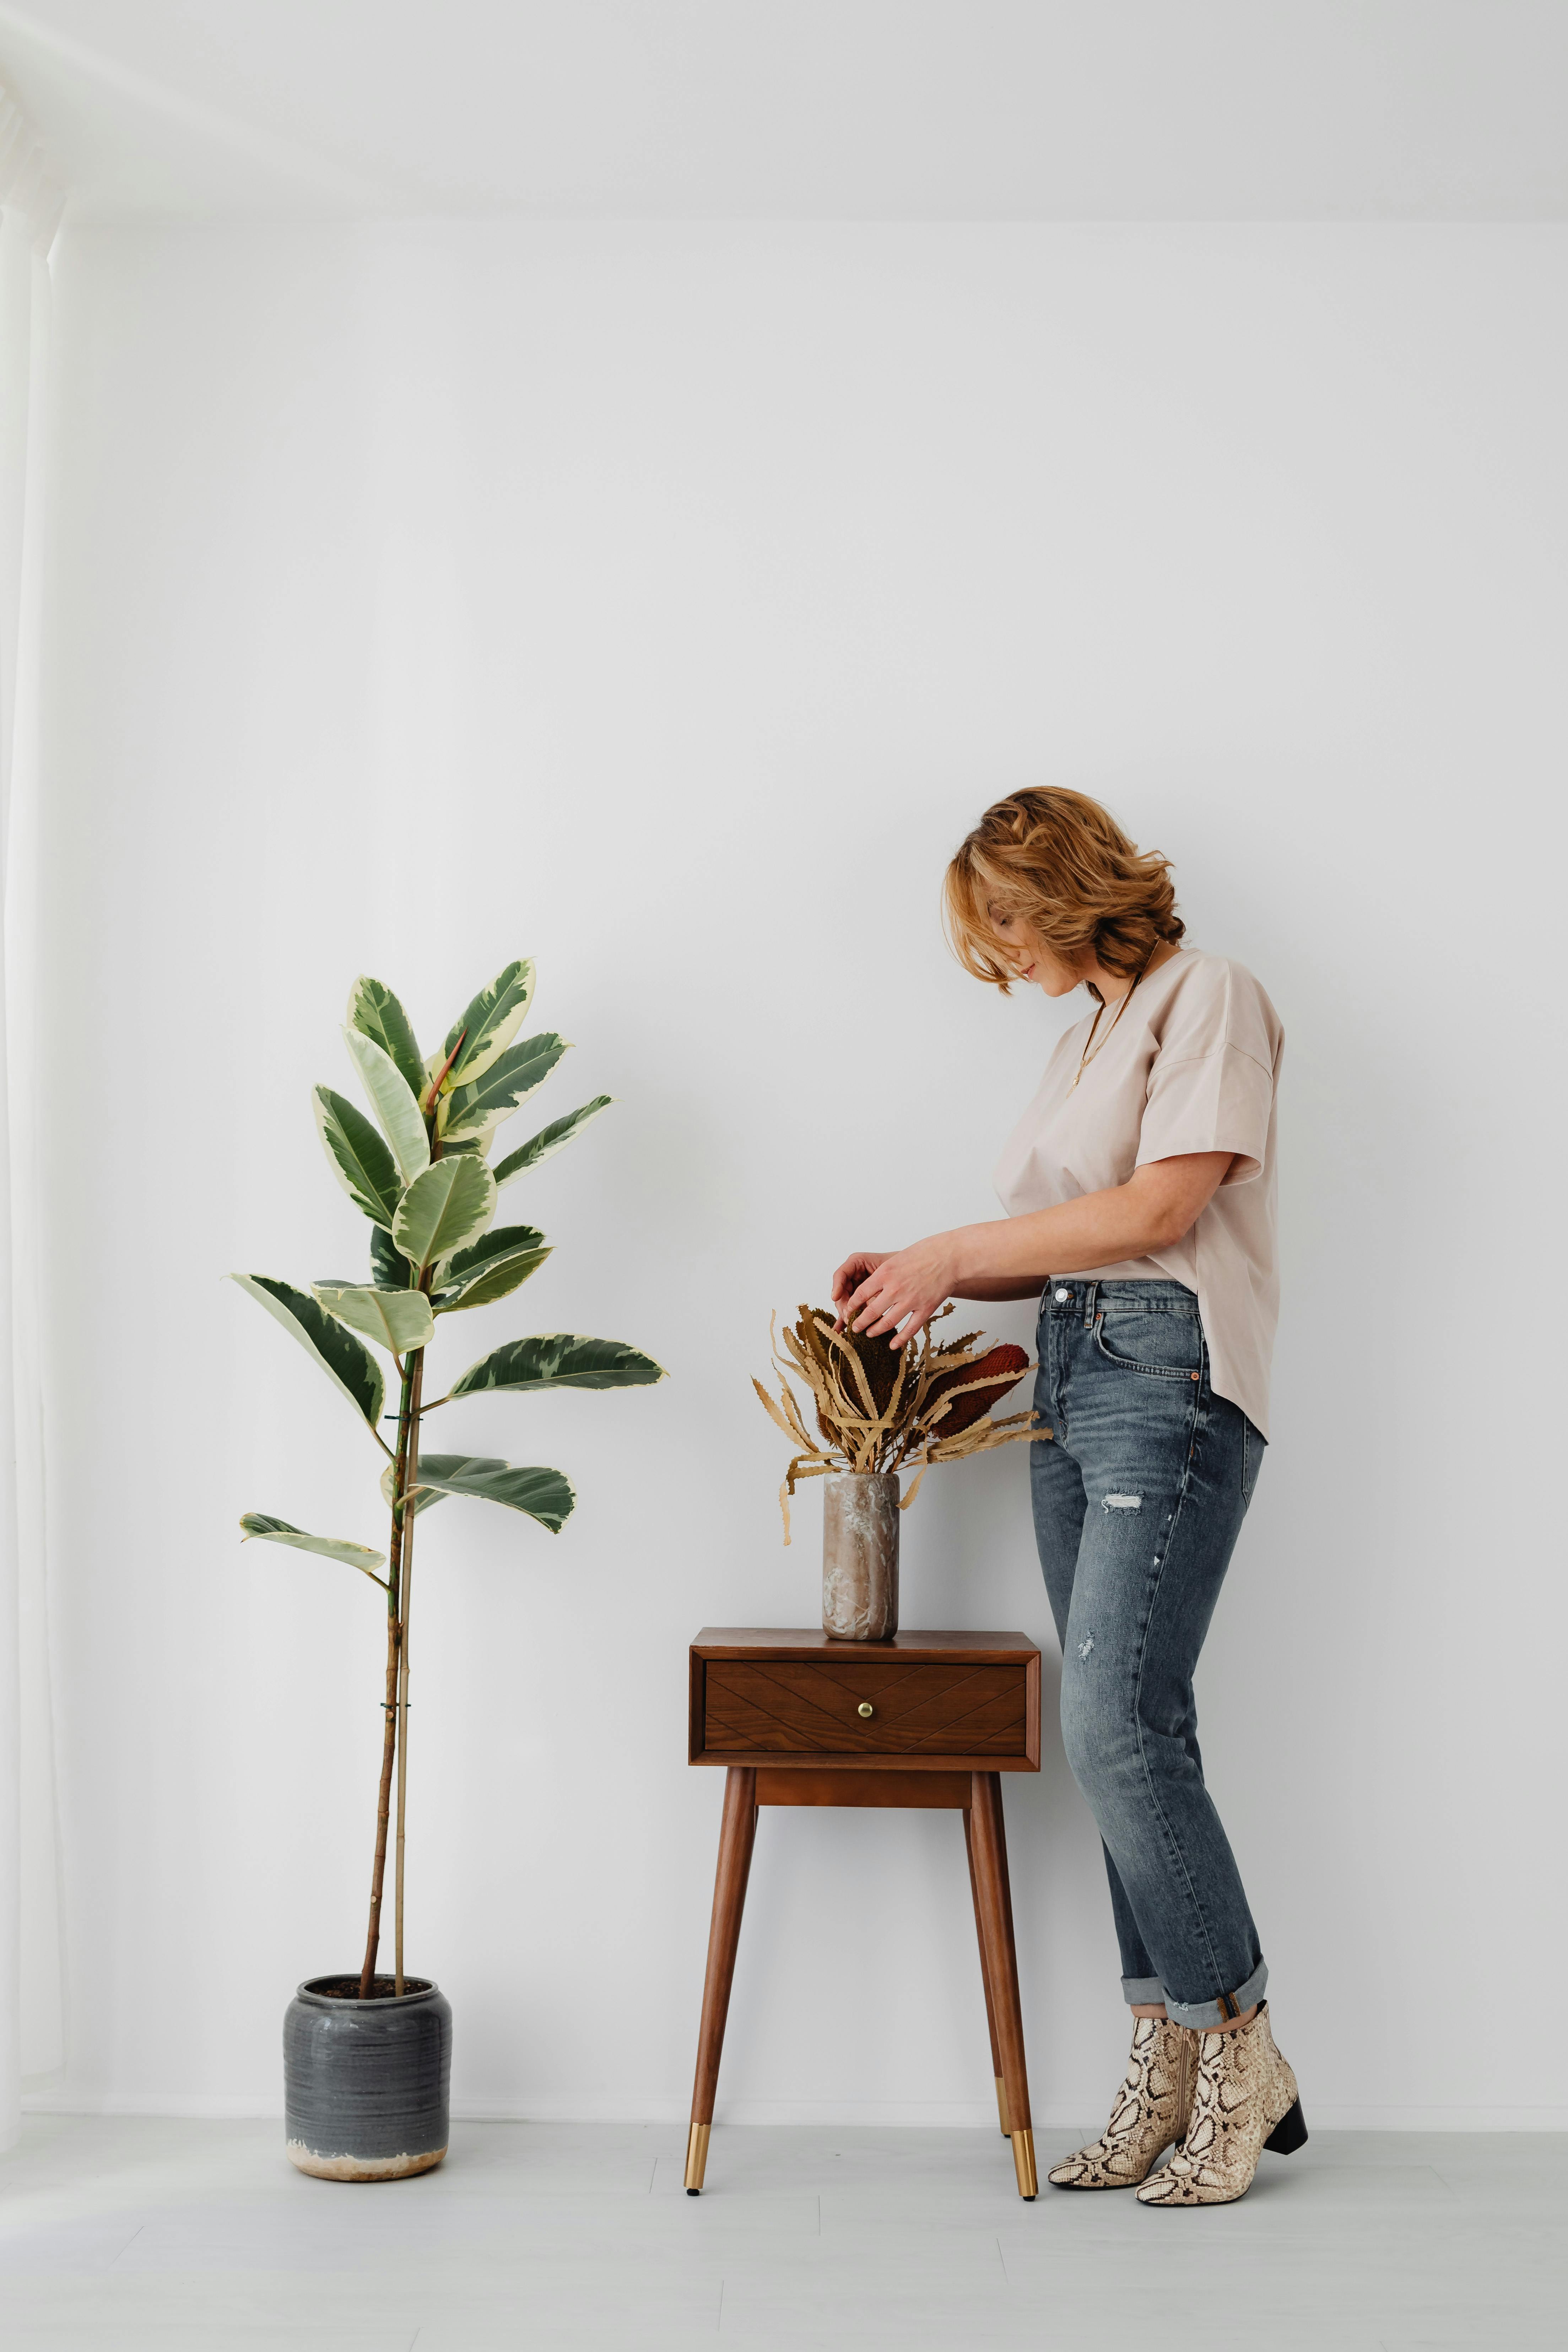 a person arranging banksia flowers in a vase